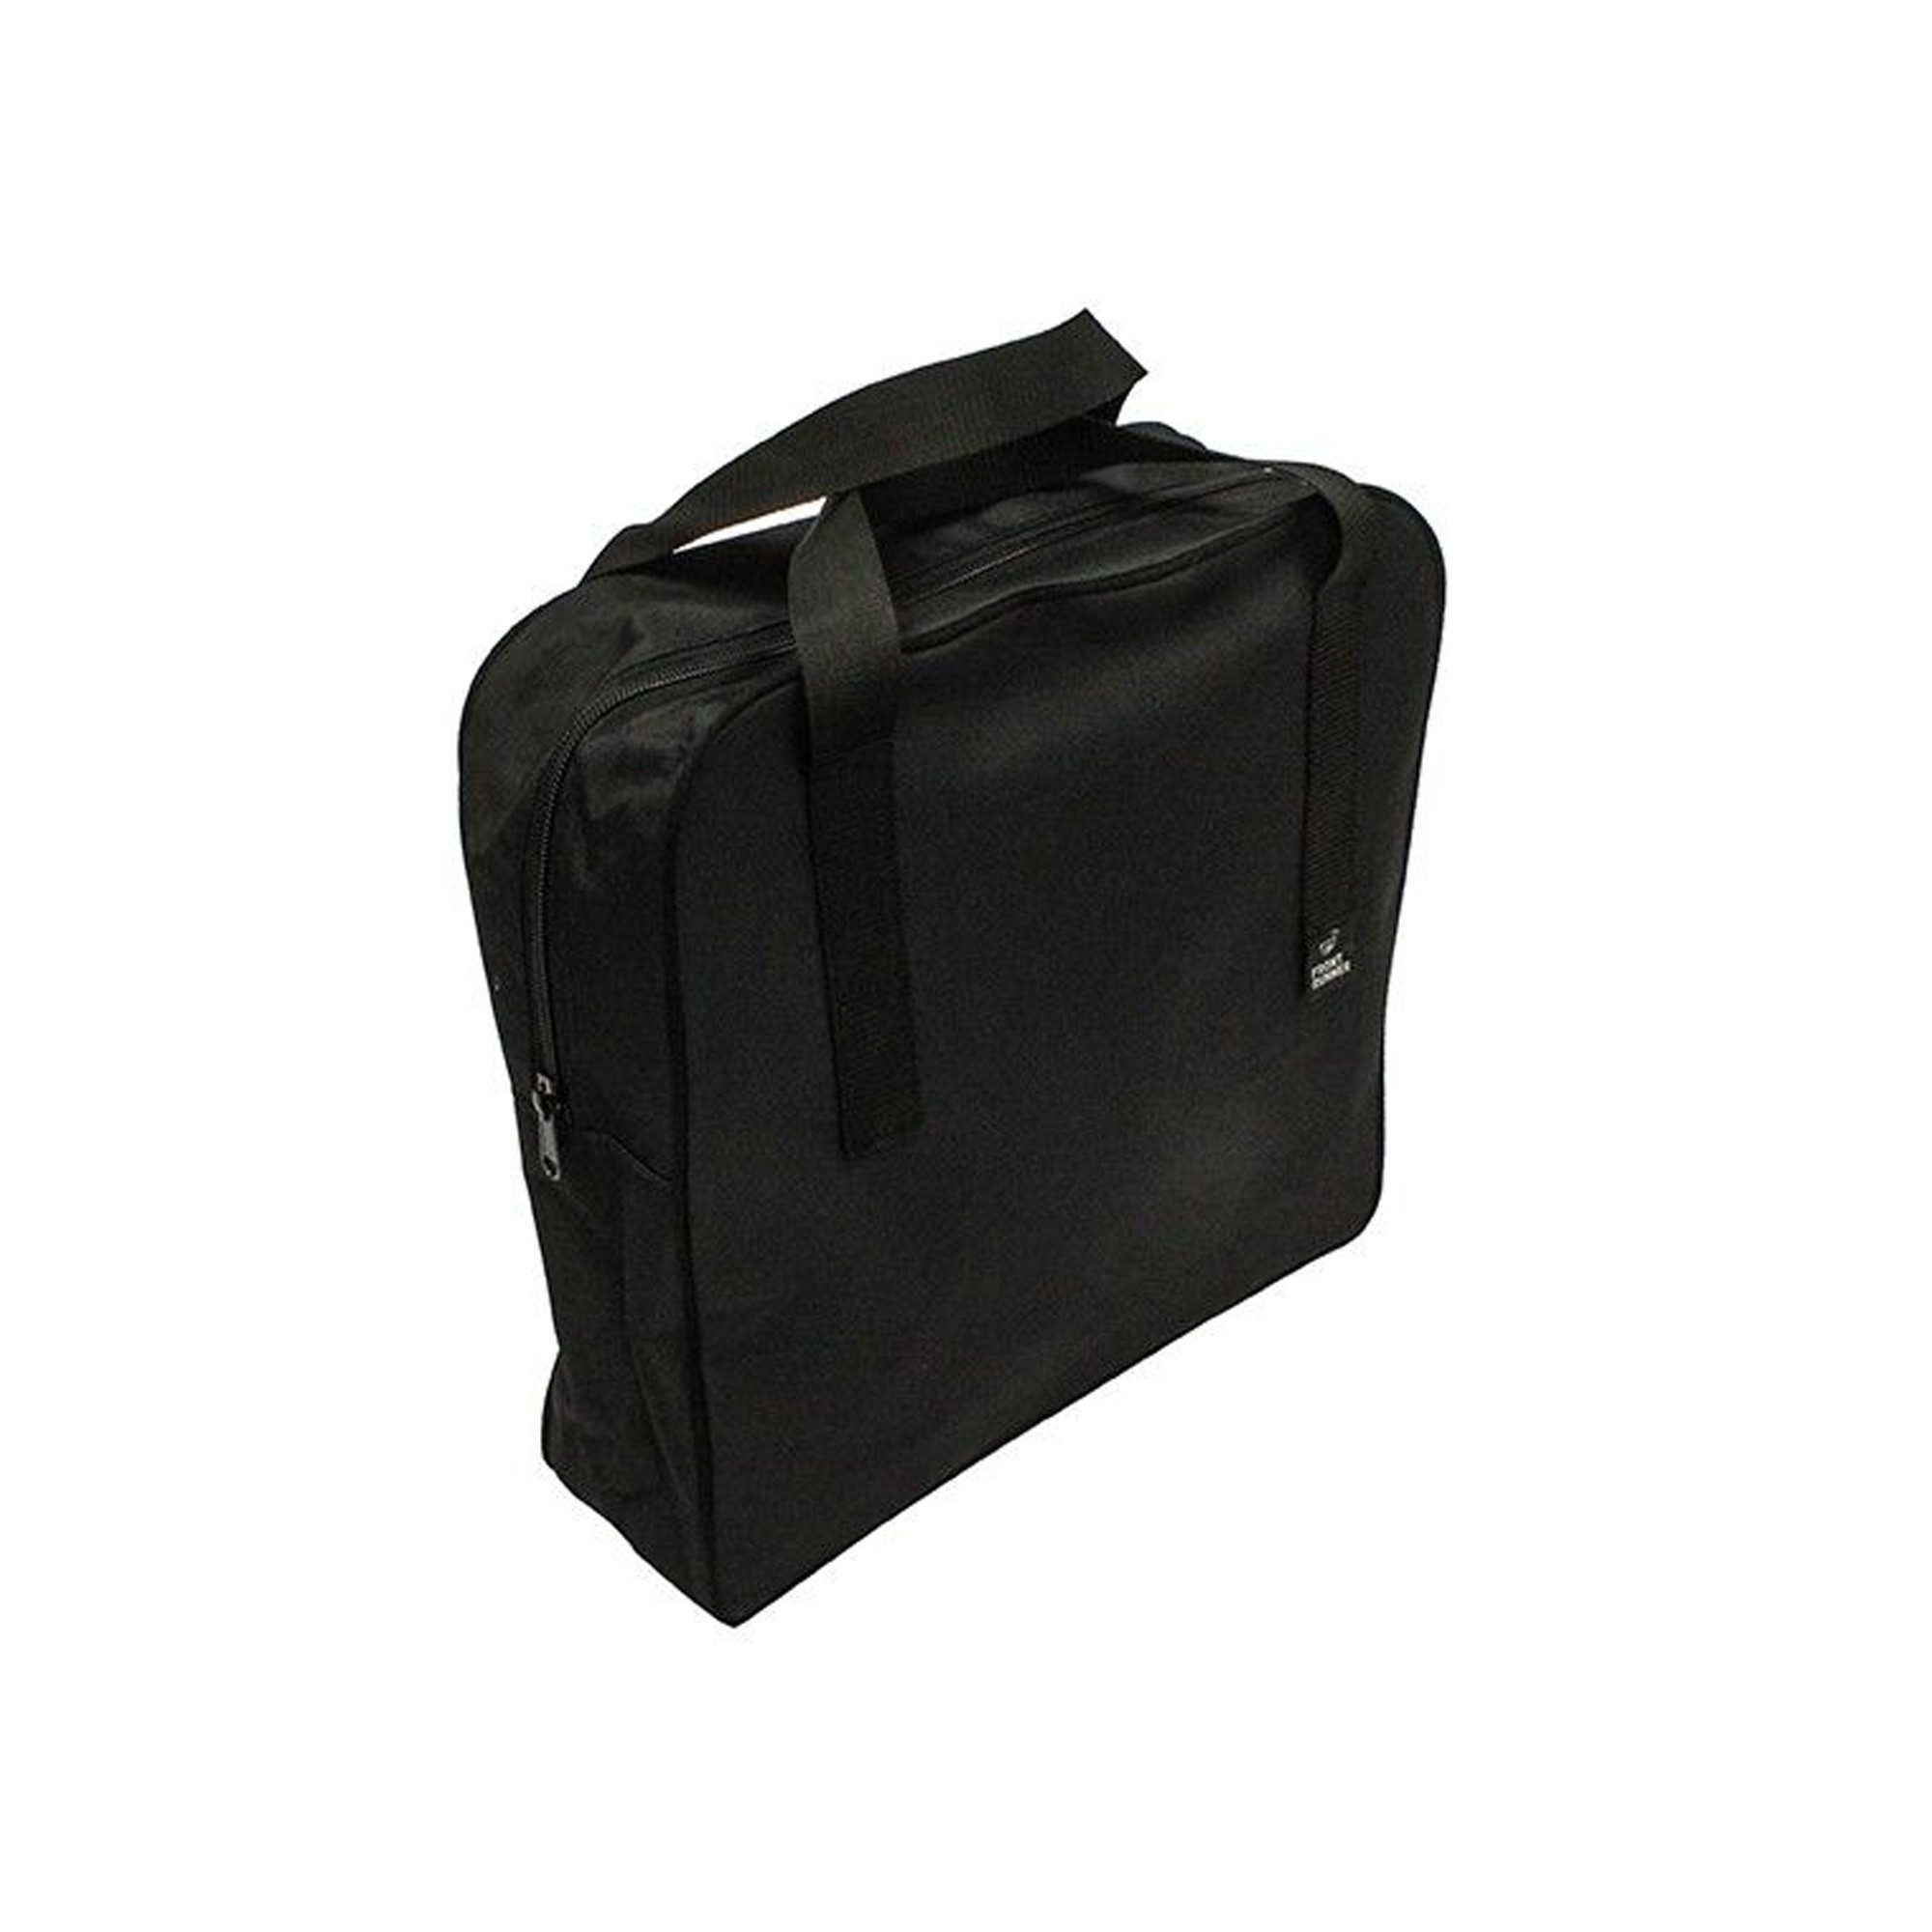 Front Runner Expander Chair Canvas Storage Bag Holds 2 Chair